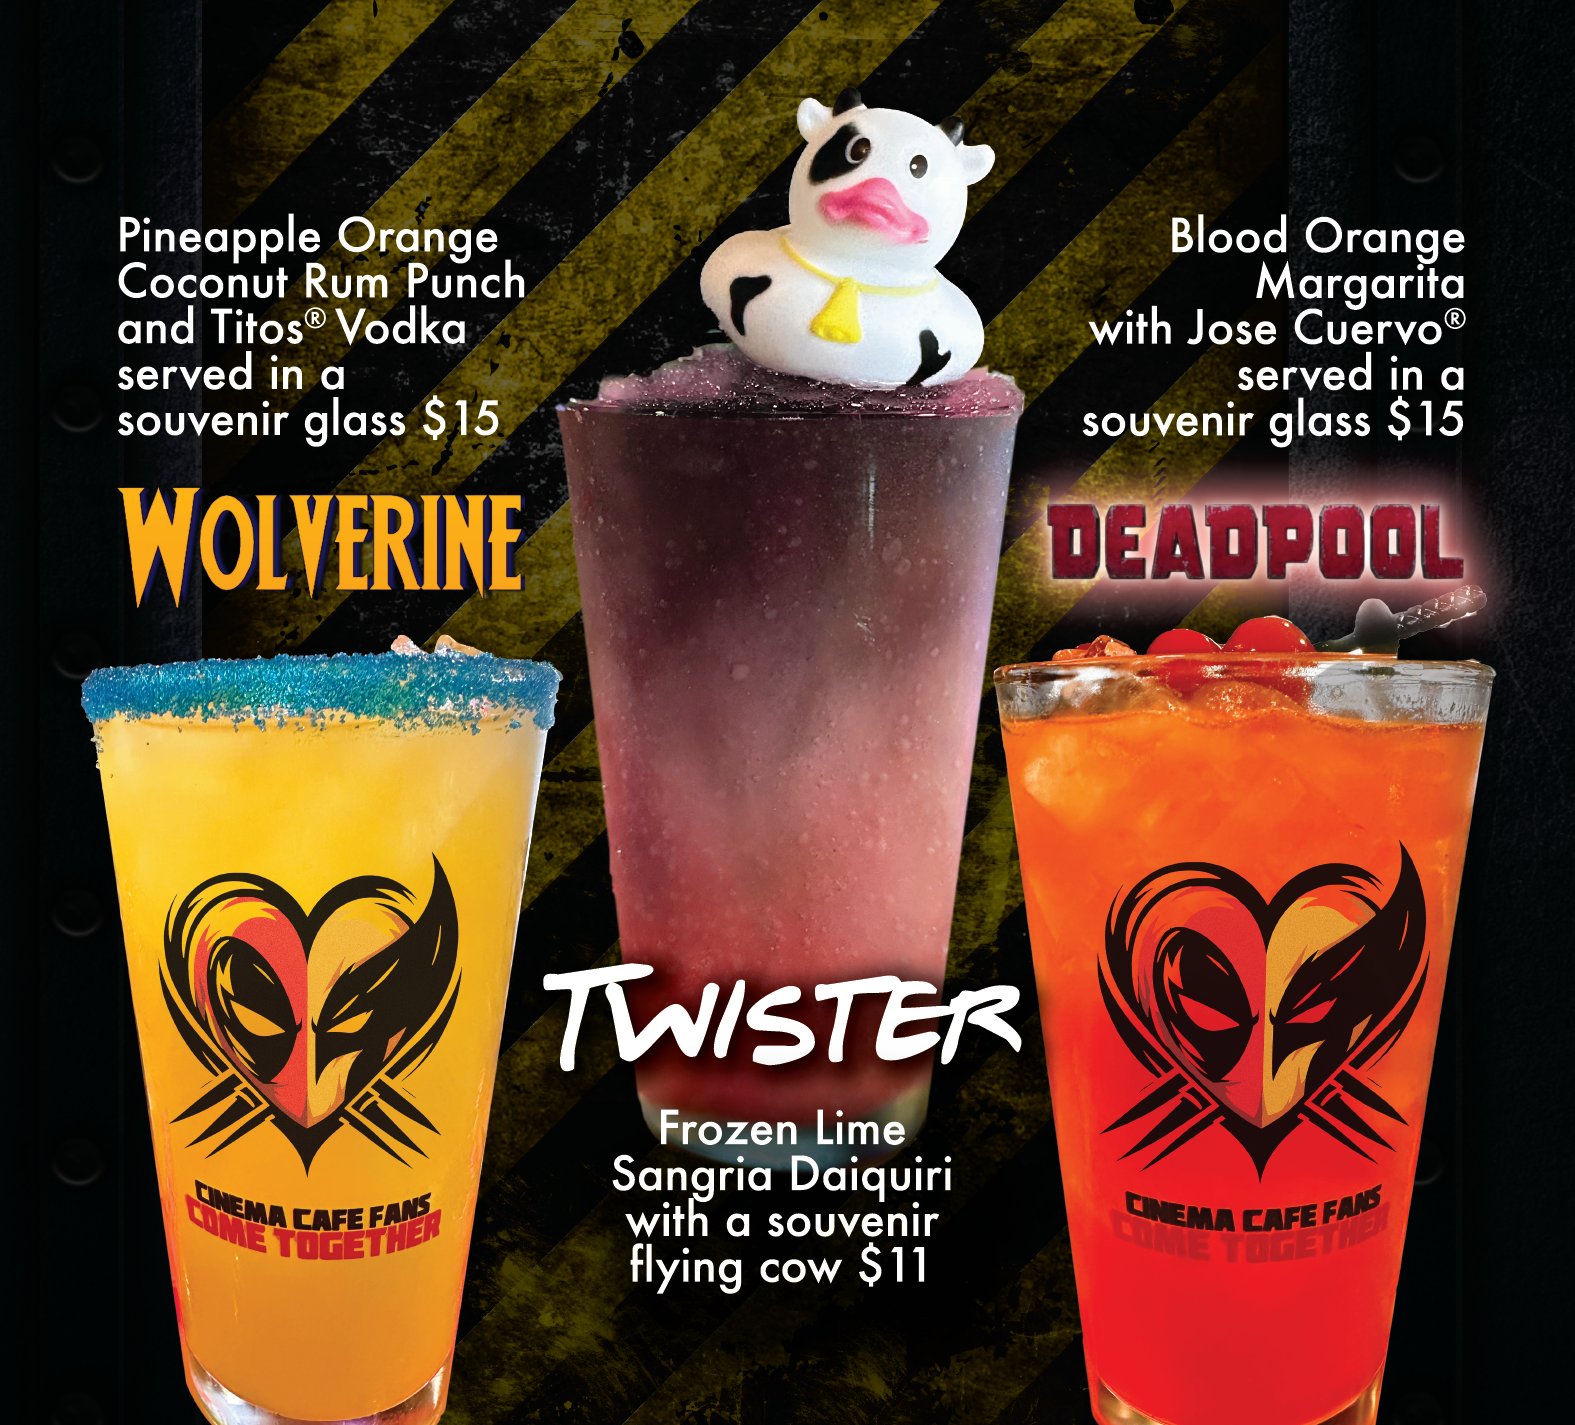 Featured Cocktails: Wolverine (Pineapple Orange Coconut Rum Punch with Souvenir Glass), Deadpool (Blood Orange Margarita with Souvenir Glass), Twister (Frozen Lime Sangria with Souvenir "Flying Cow")